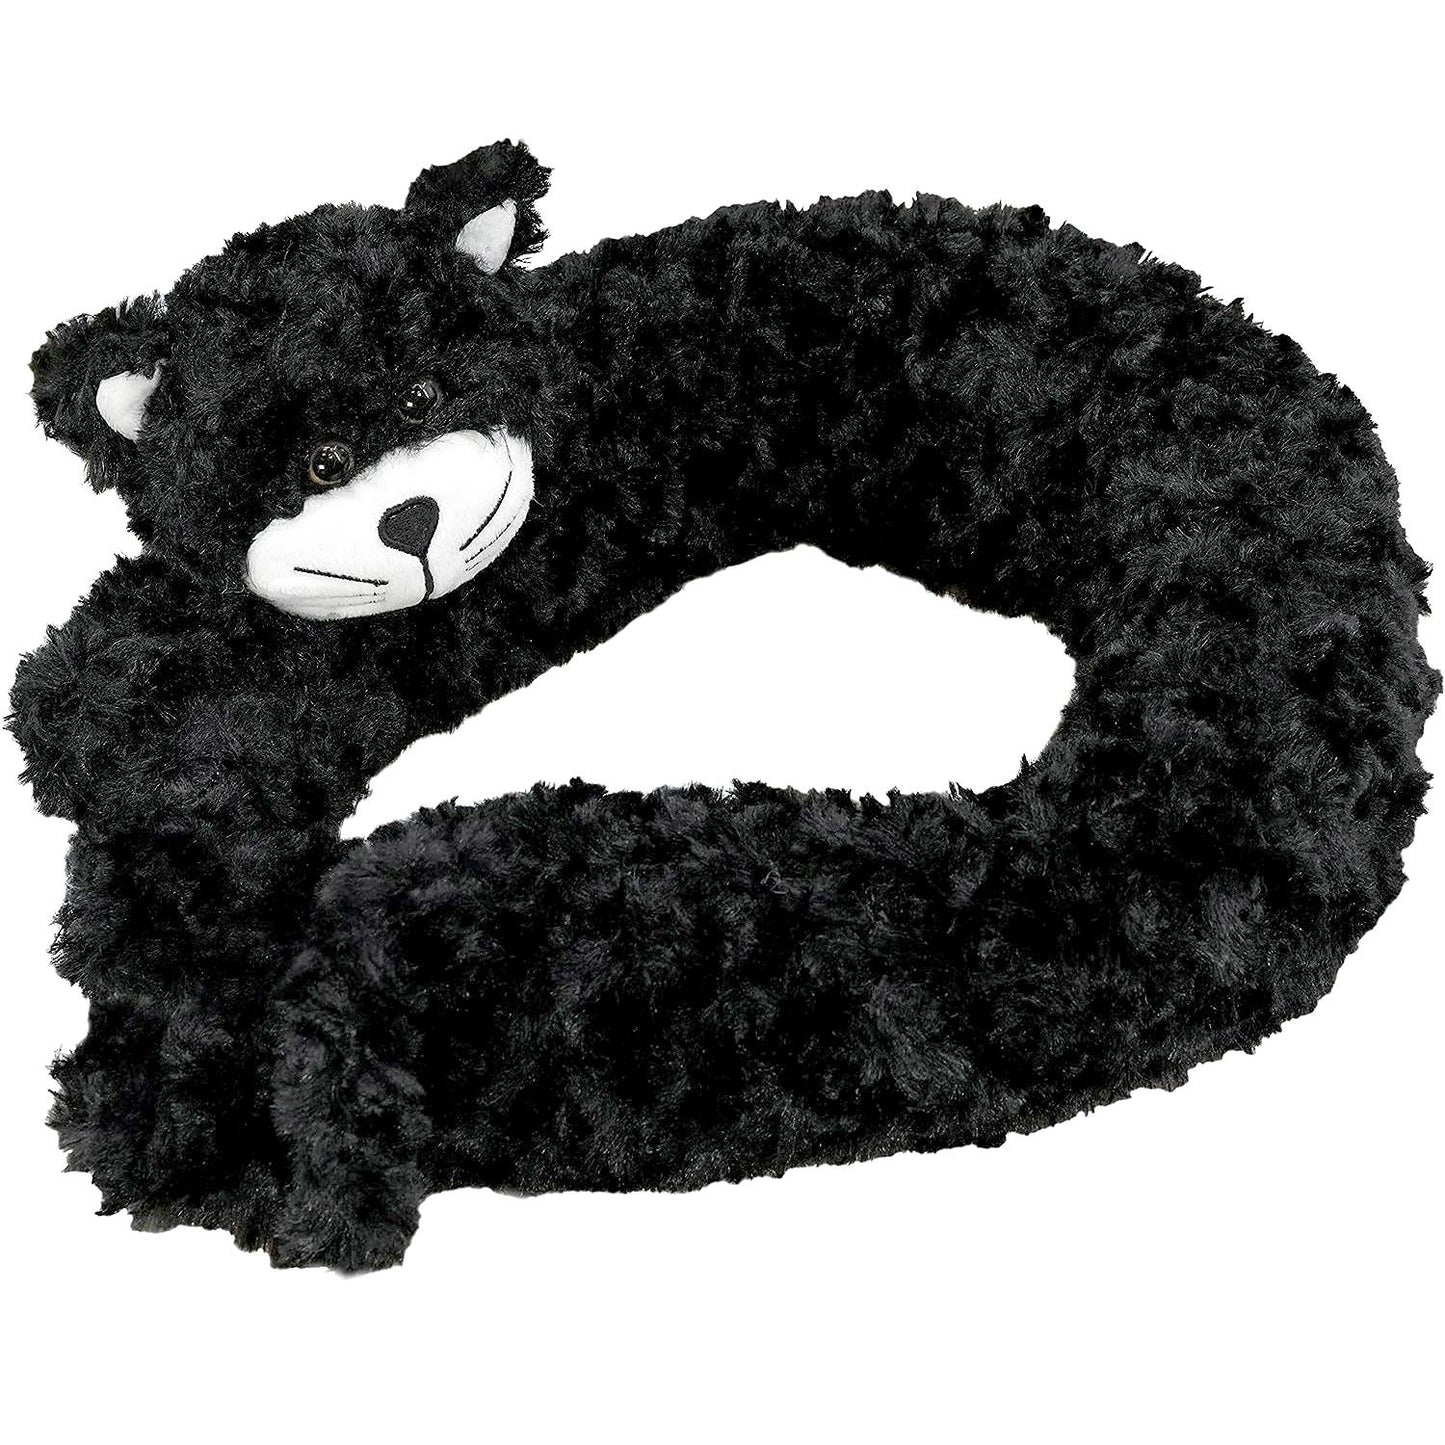 Novelty Black Cat Excluder by Geezy - UKBuyZone